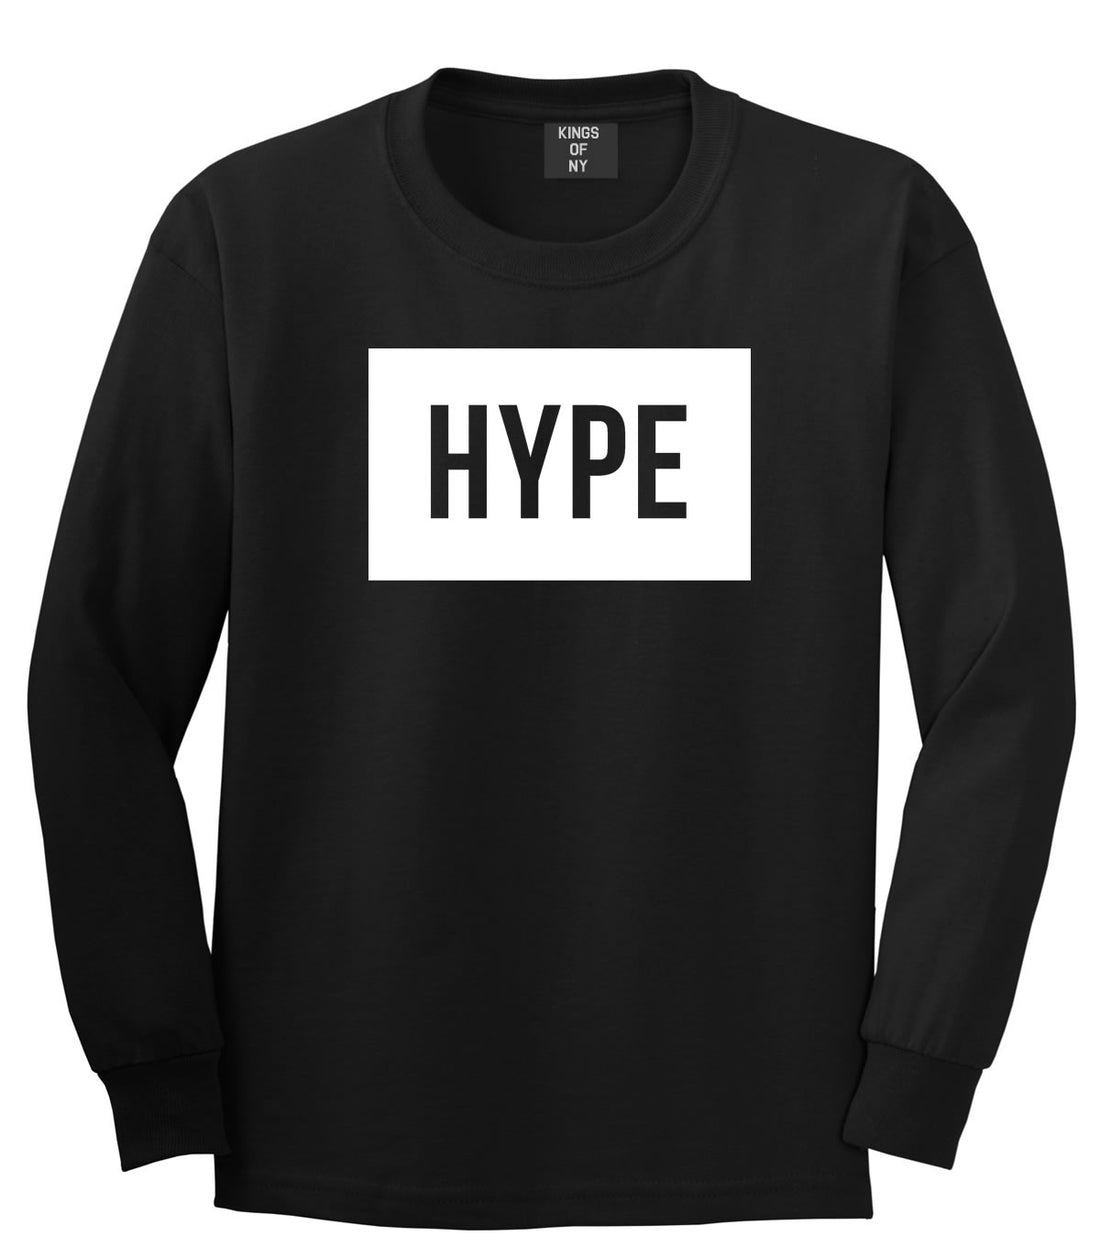 Hype Style Streetwear Brand Logo White by Kings Of NY Long Sleeve Boys Kids T-Shirt In Black by Kings Of NY